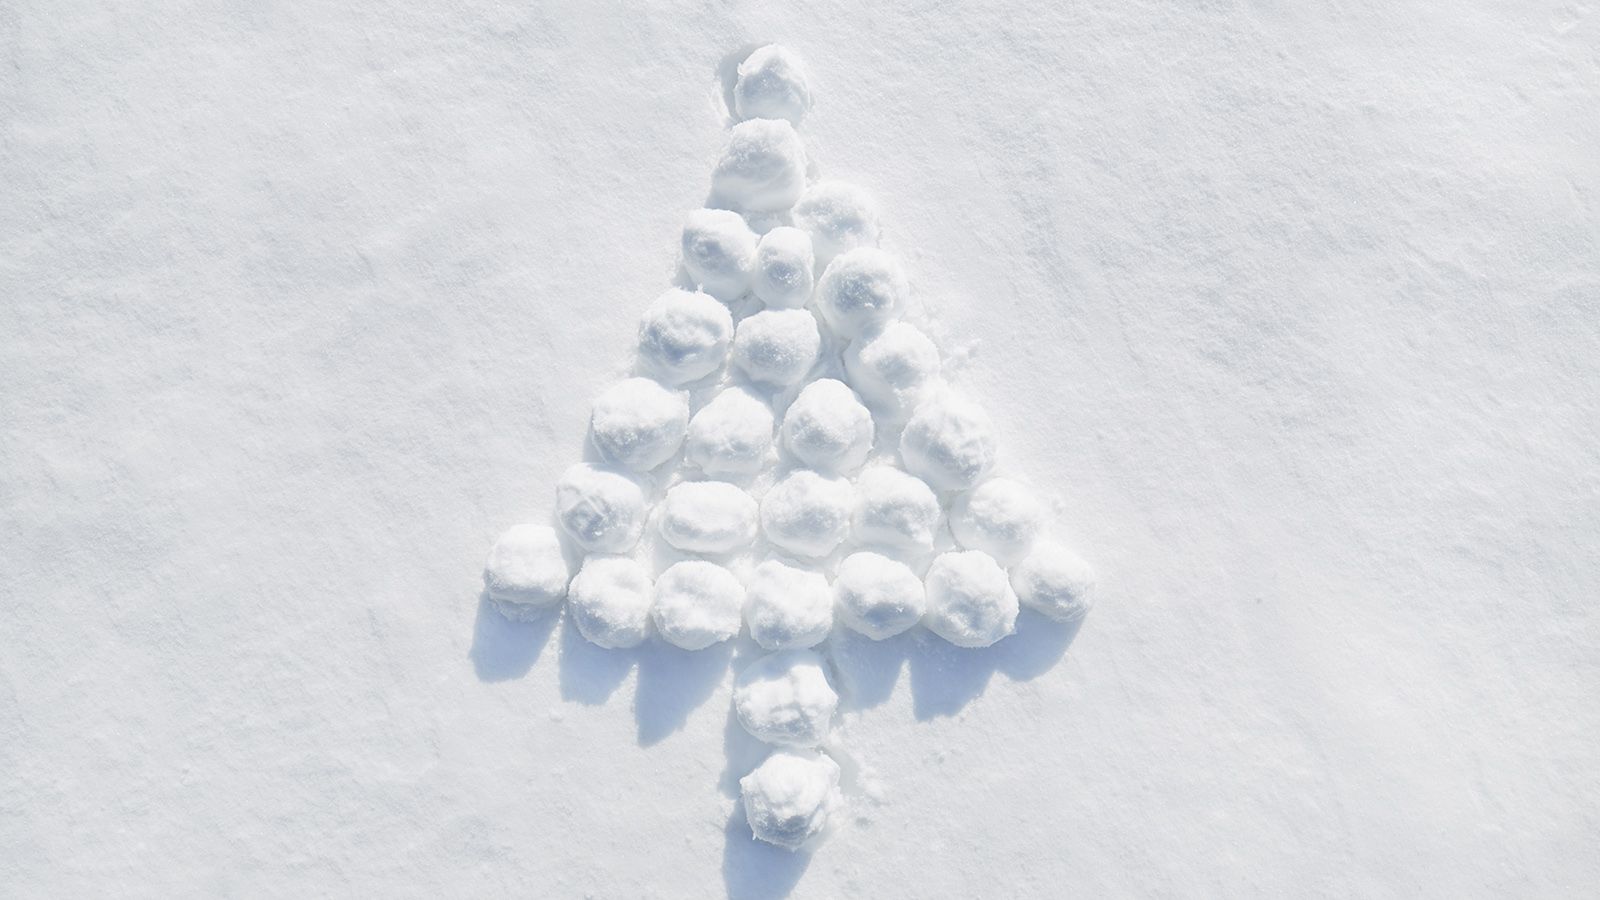 Why Is Everyone Dreaming of a White Christmas?